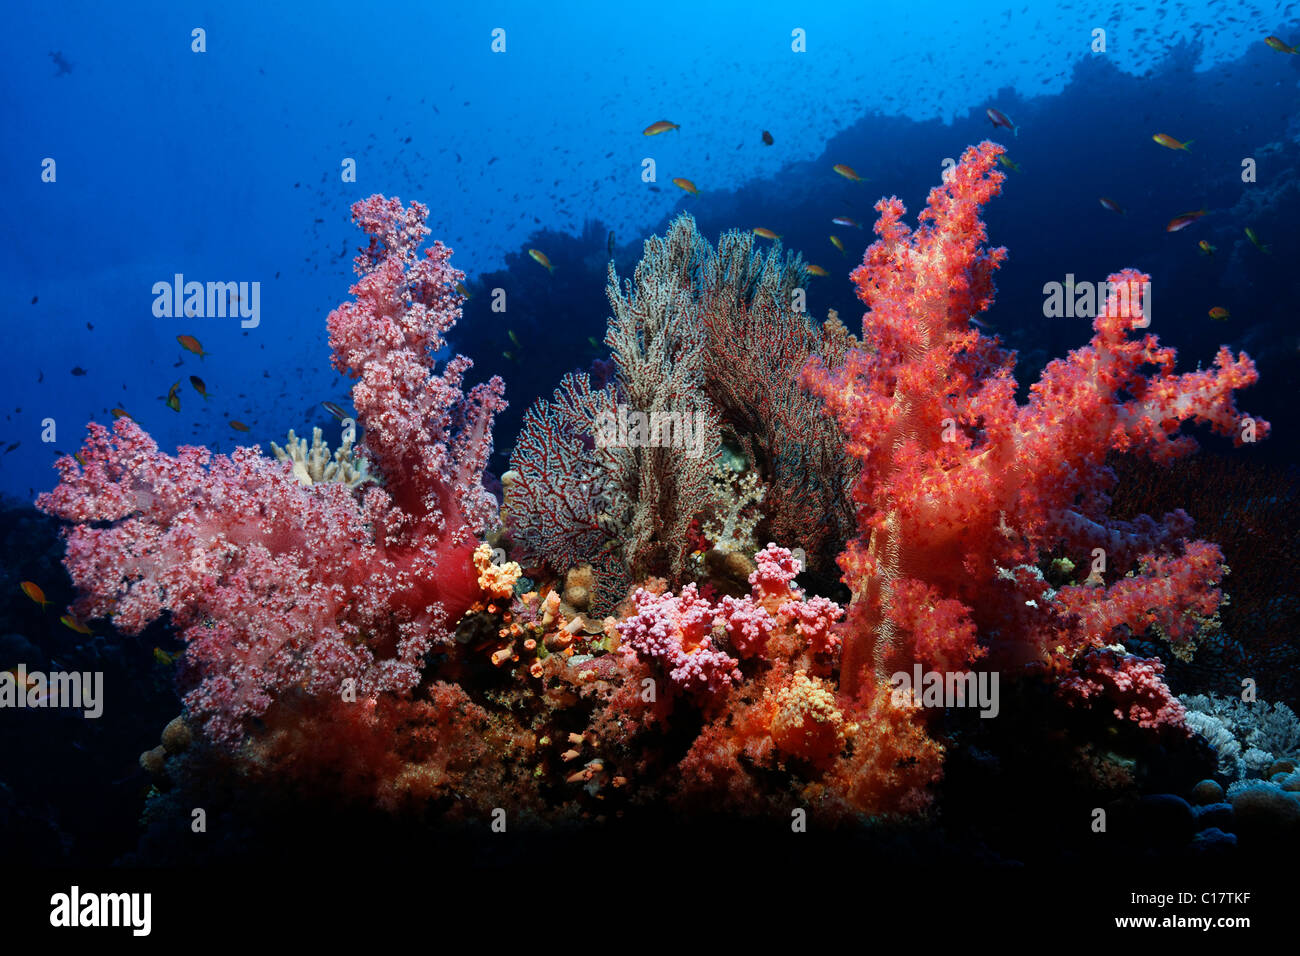 Coral reef with magnificent red Soft Corals (Dendronephthya sp.) and Sea Fans (Acabaria splendens), many small reef fishes Stock Photo